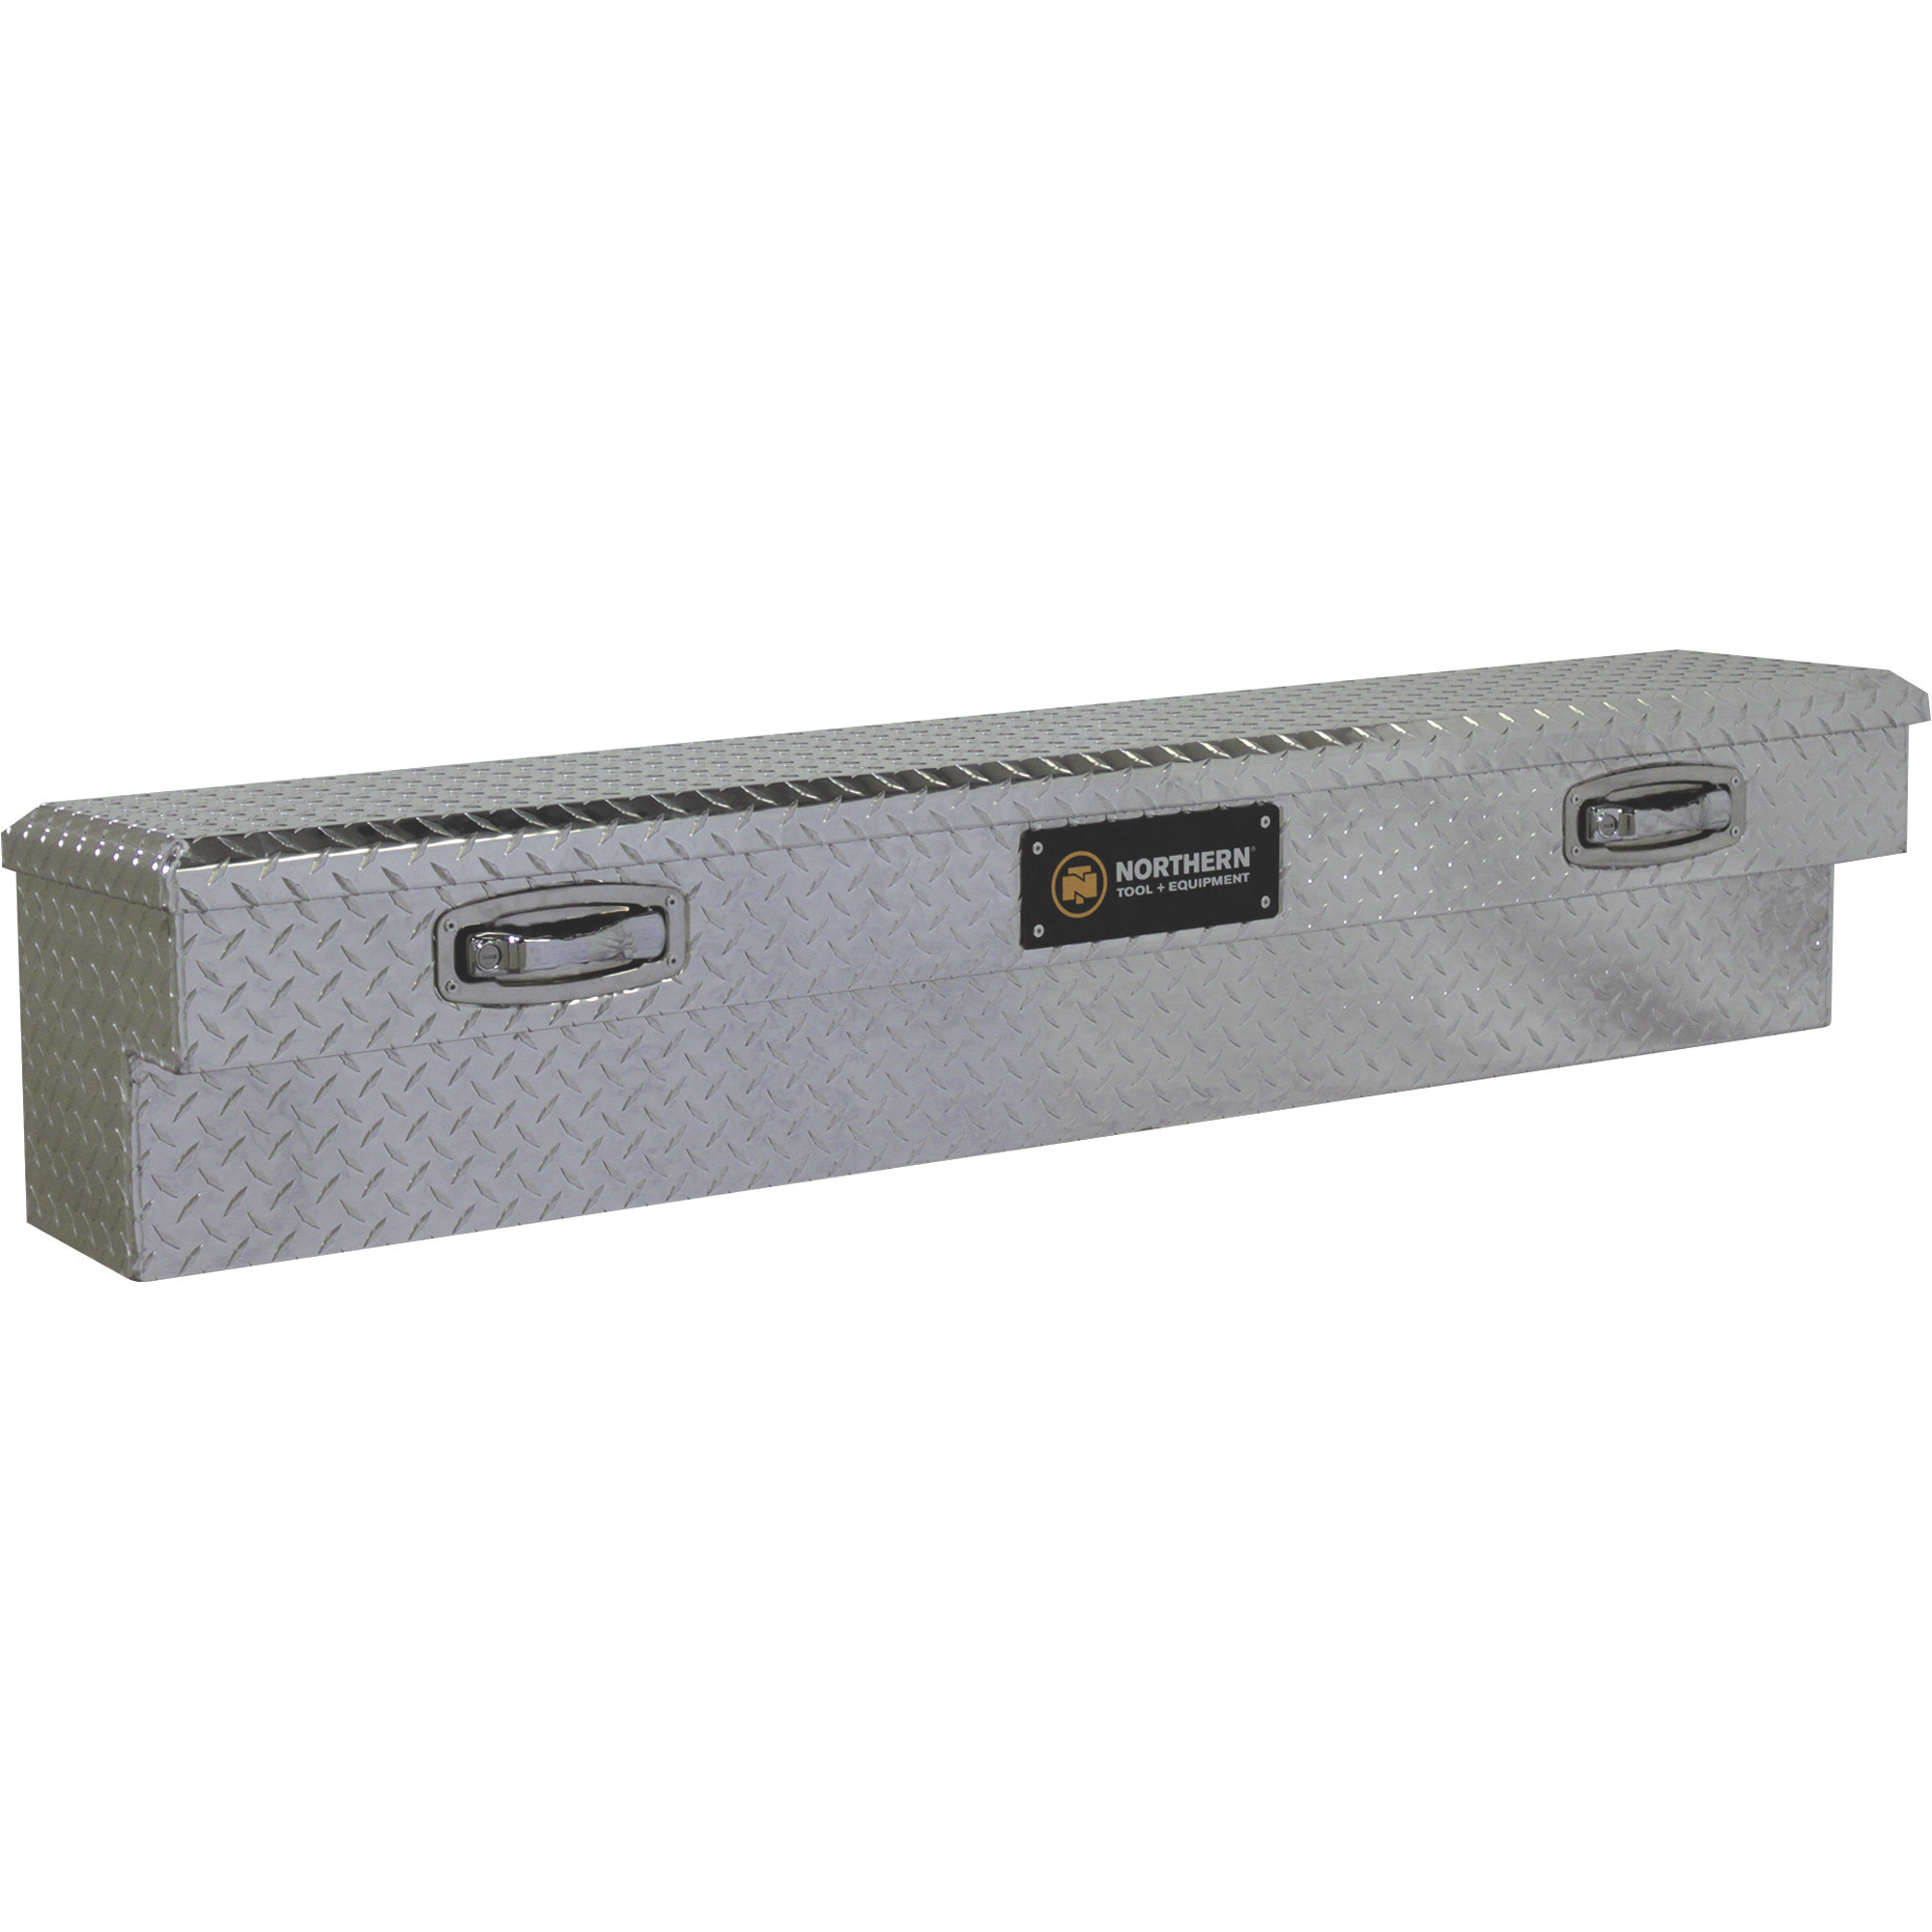 Northern Tool Side-Mount Truck Tool Box, Aluminum, Diamond Plate, Pull Handle Latches, 60Inch x 11.5Inch x 11Inch, Model 36012758